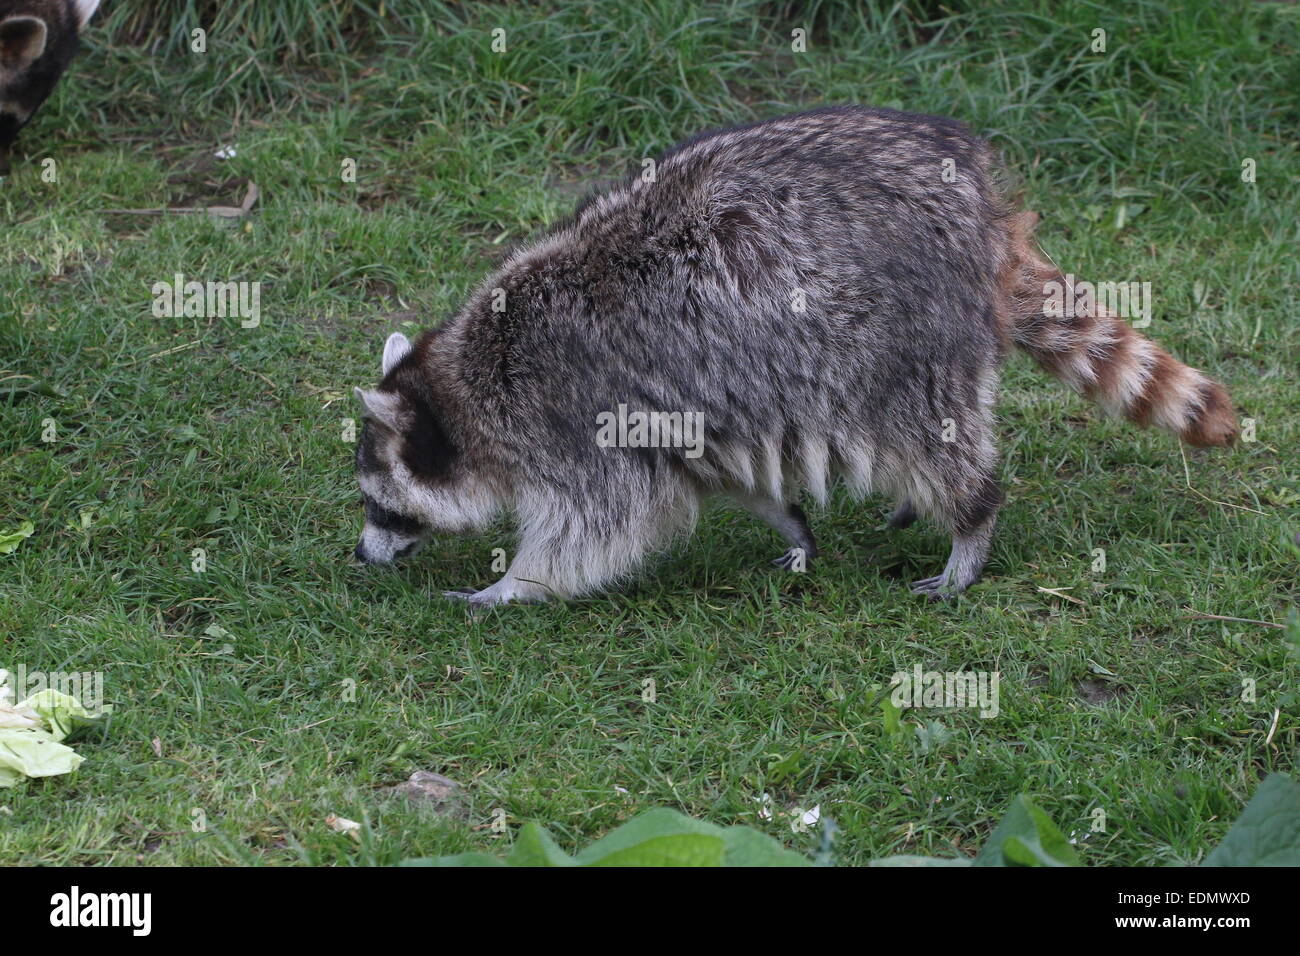 North American or  northern raccoon ( Procyon lotor) walking past in grass land setting Stock Photo